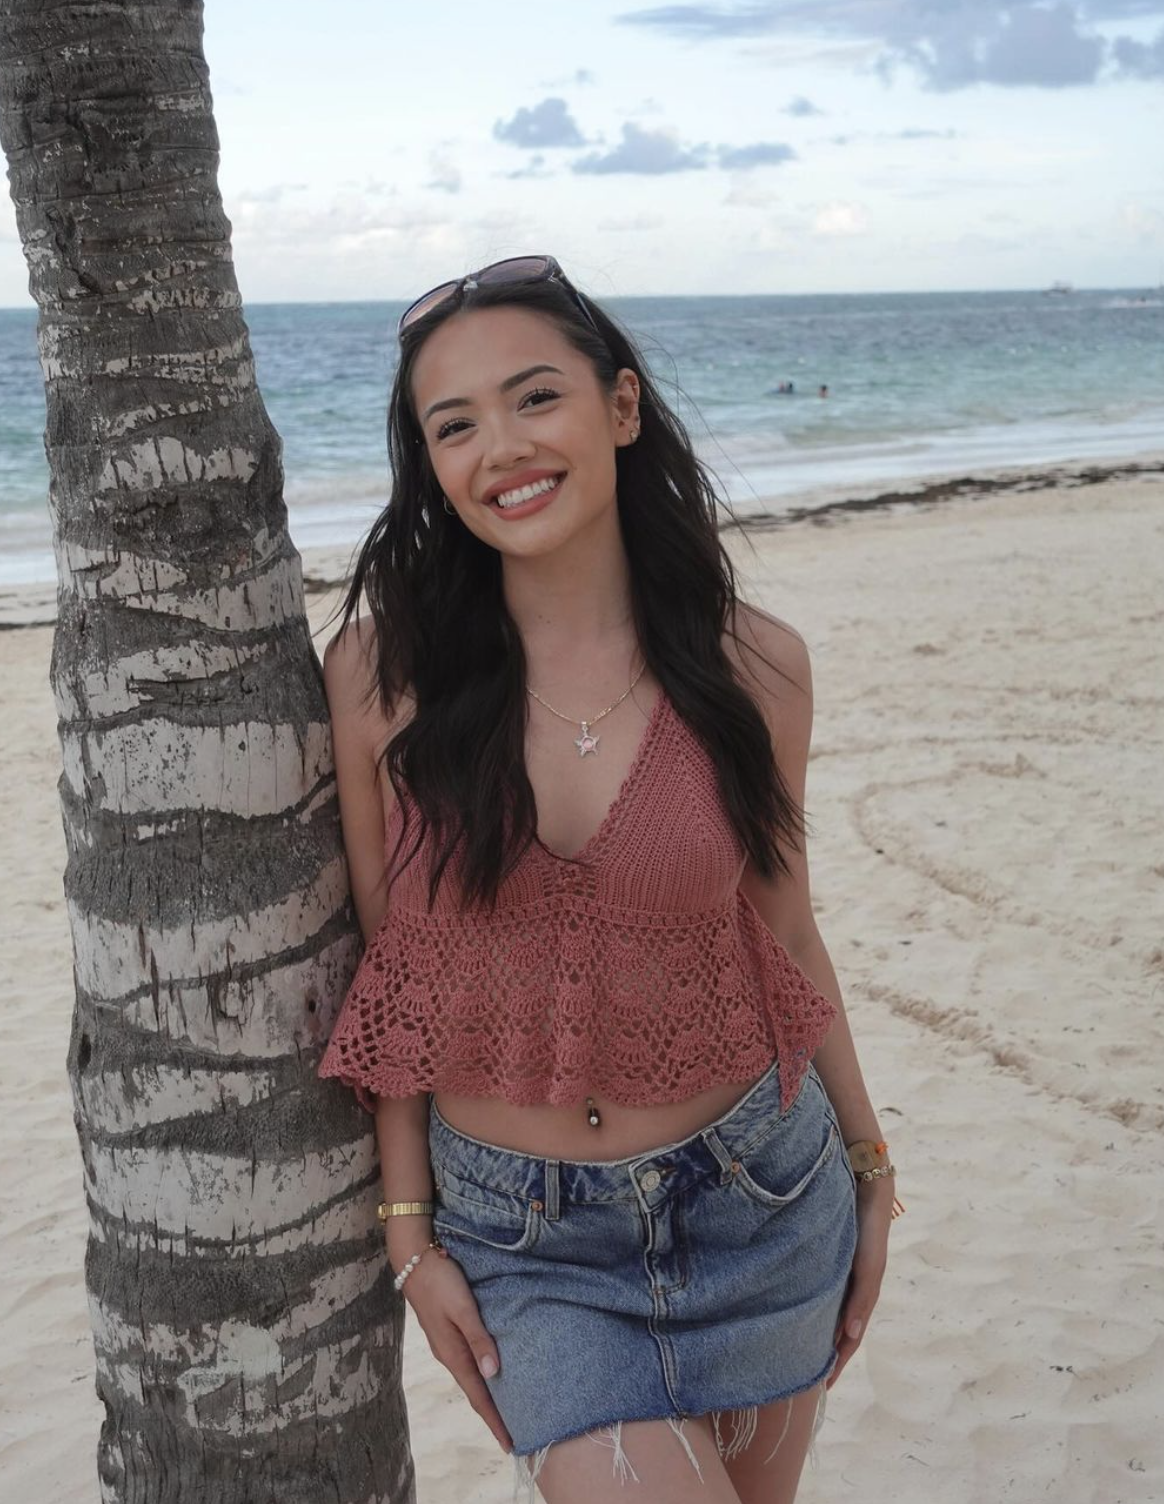 Canadian Vlogger Icess: On Turning Her Lifestyle Into A Full-time Career